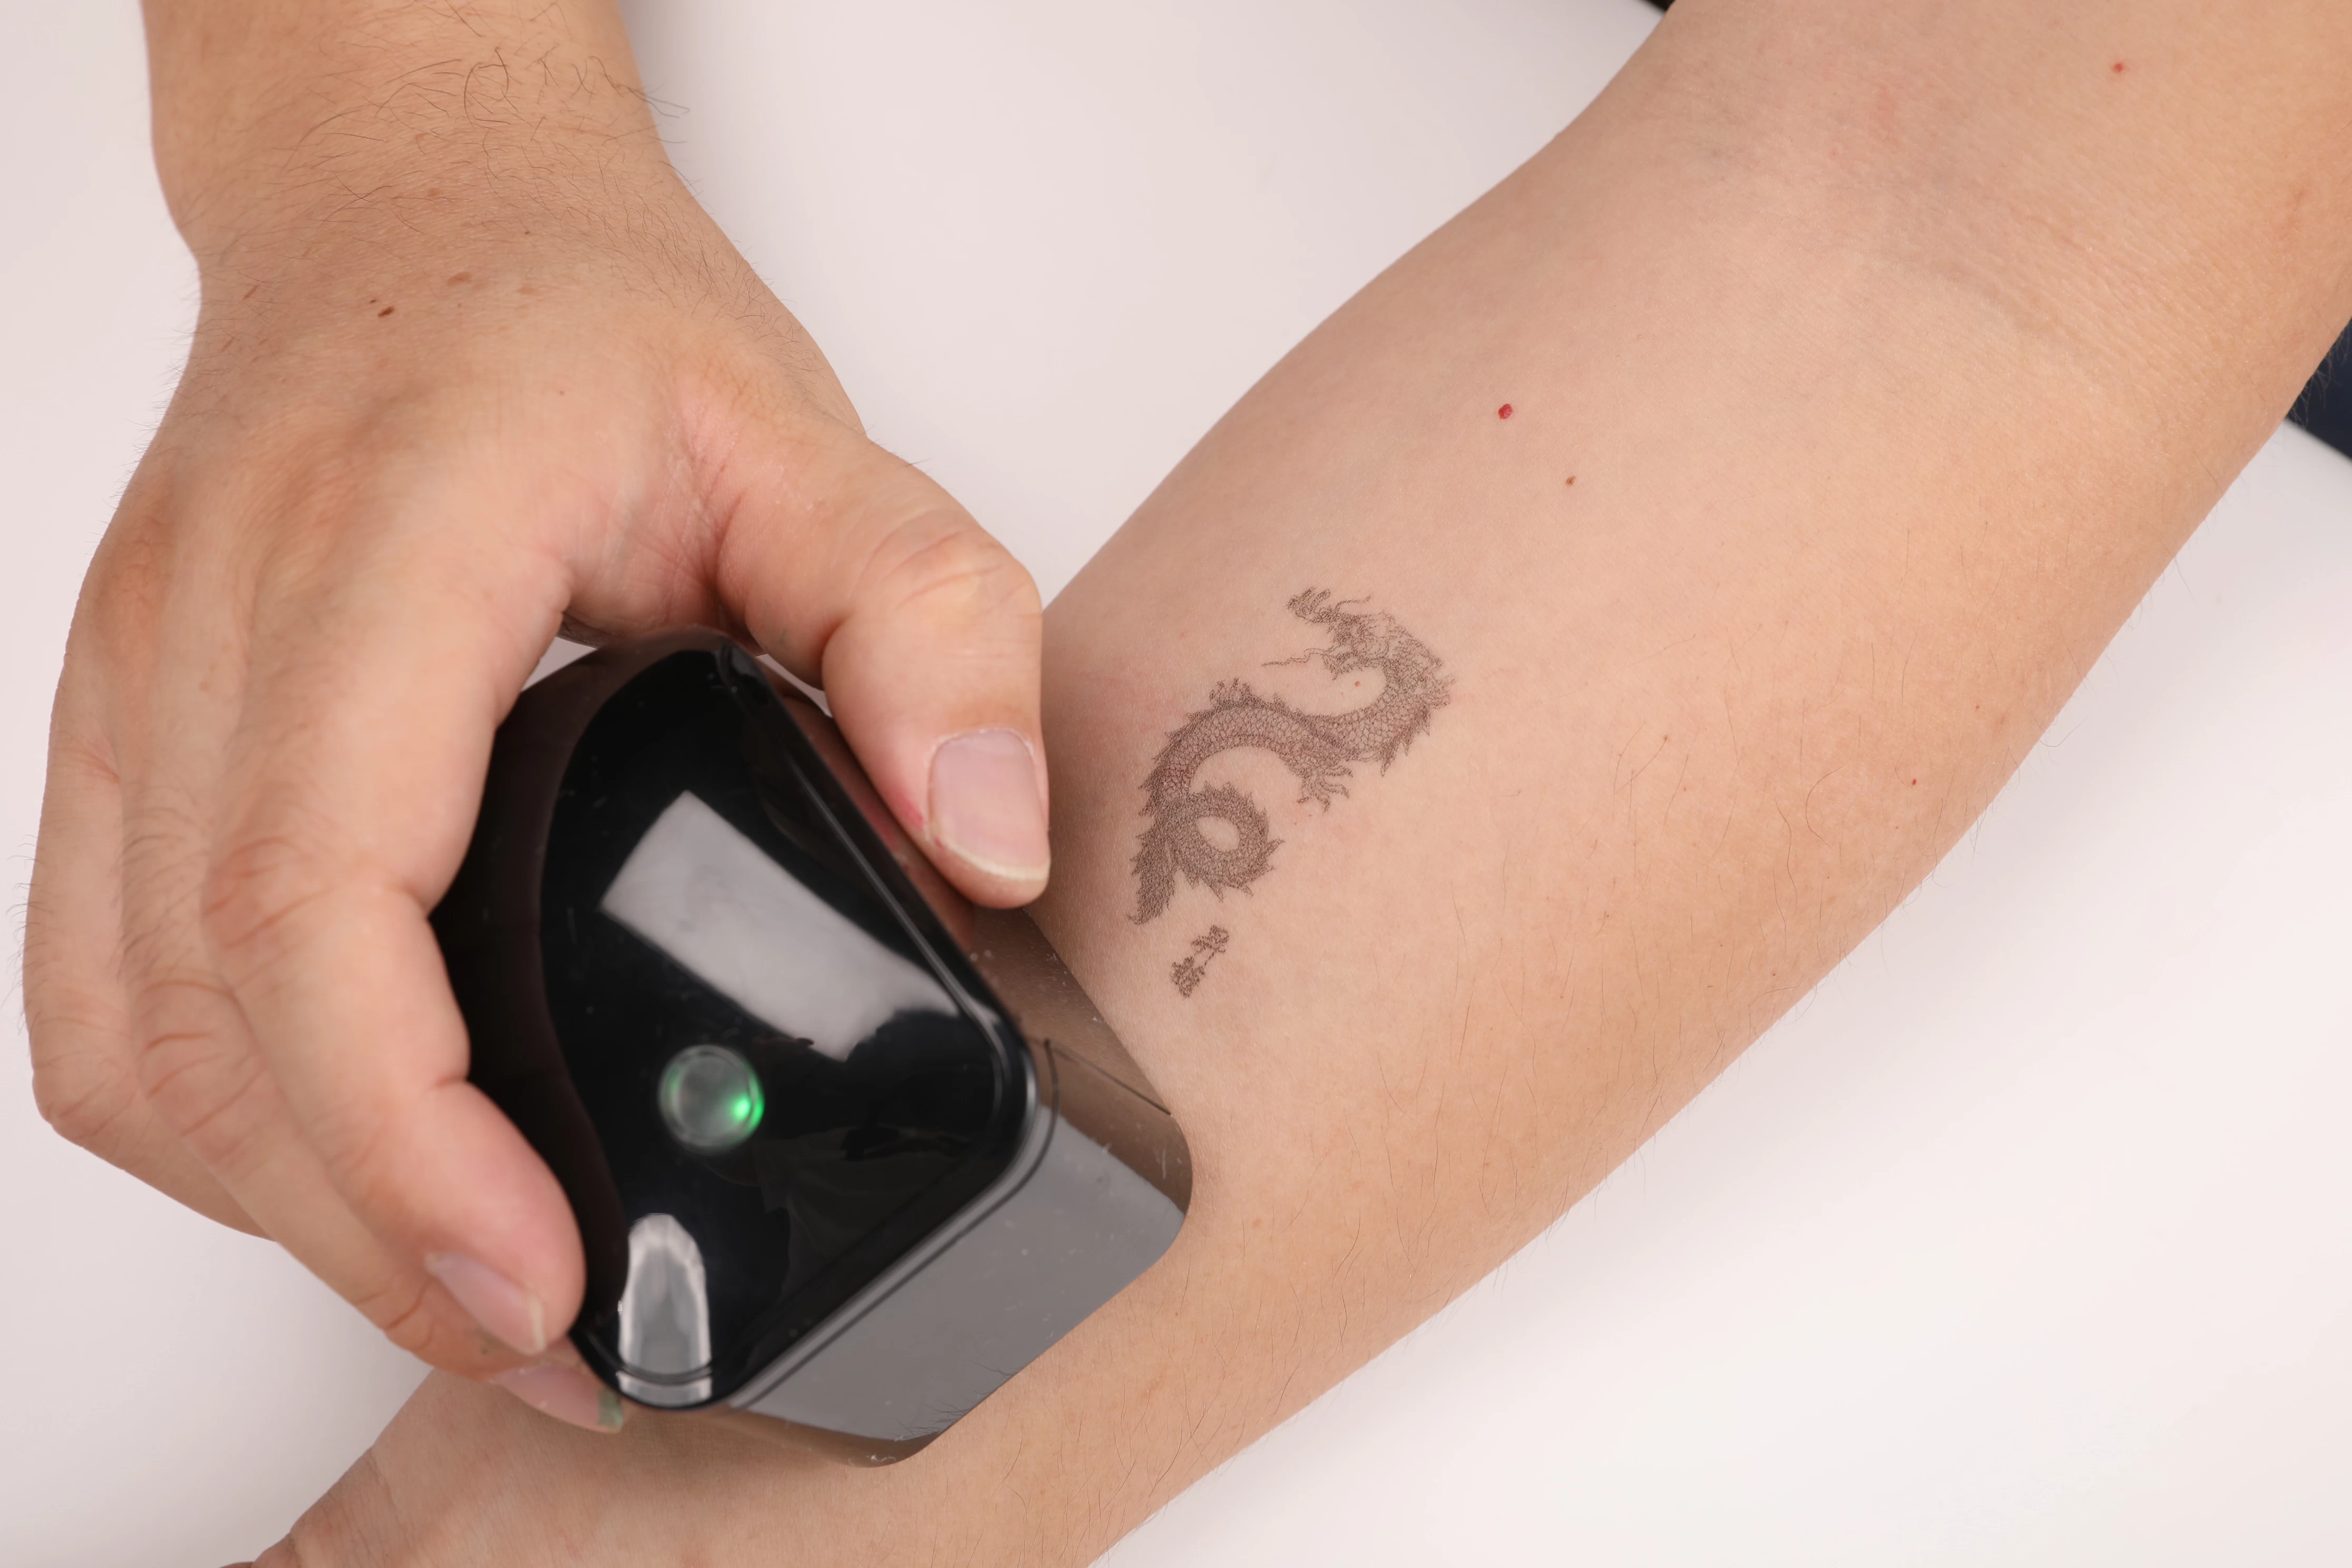 JER Tattoo Printer--JP01 the best Portable Handheld Printer Compatible with Multiple Surfaces